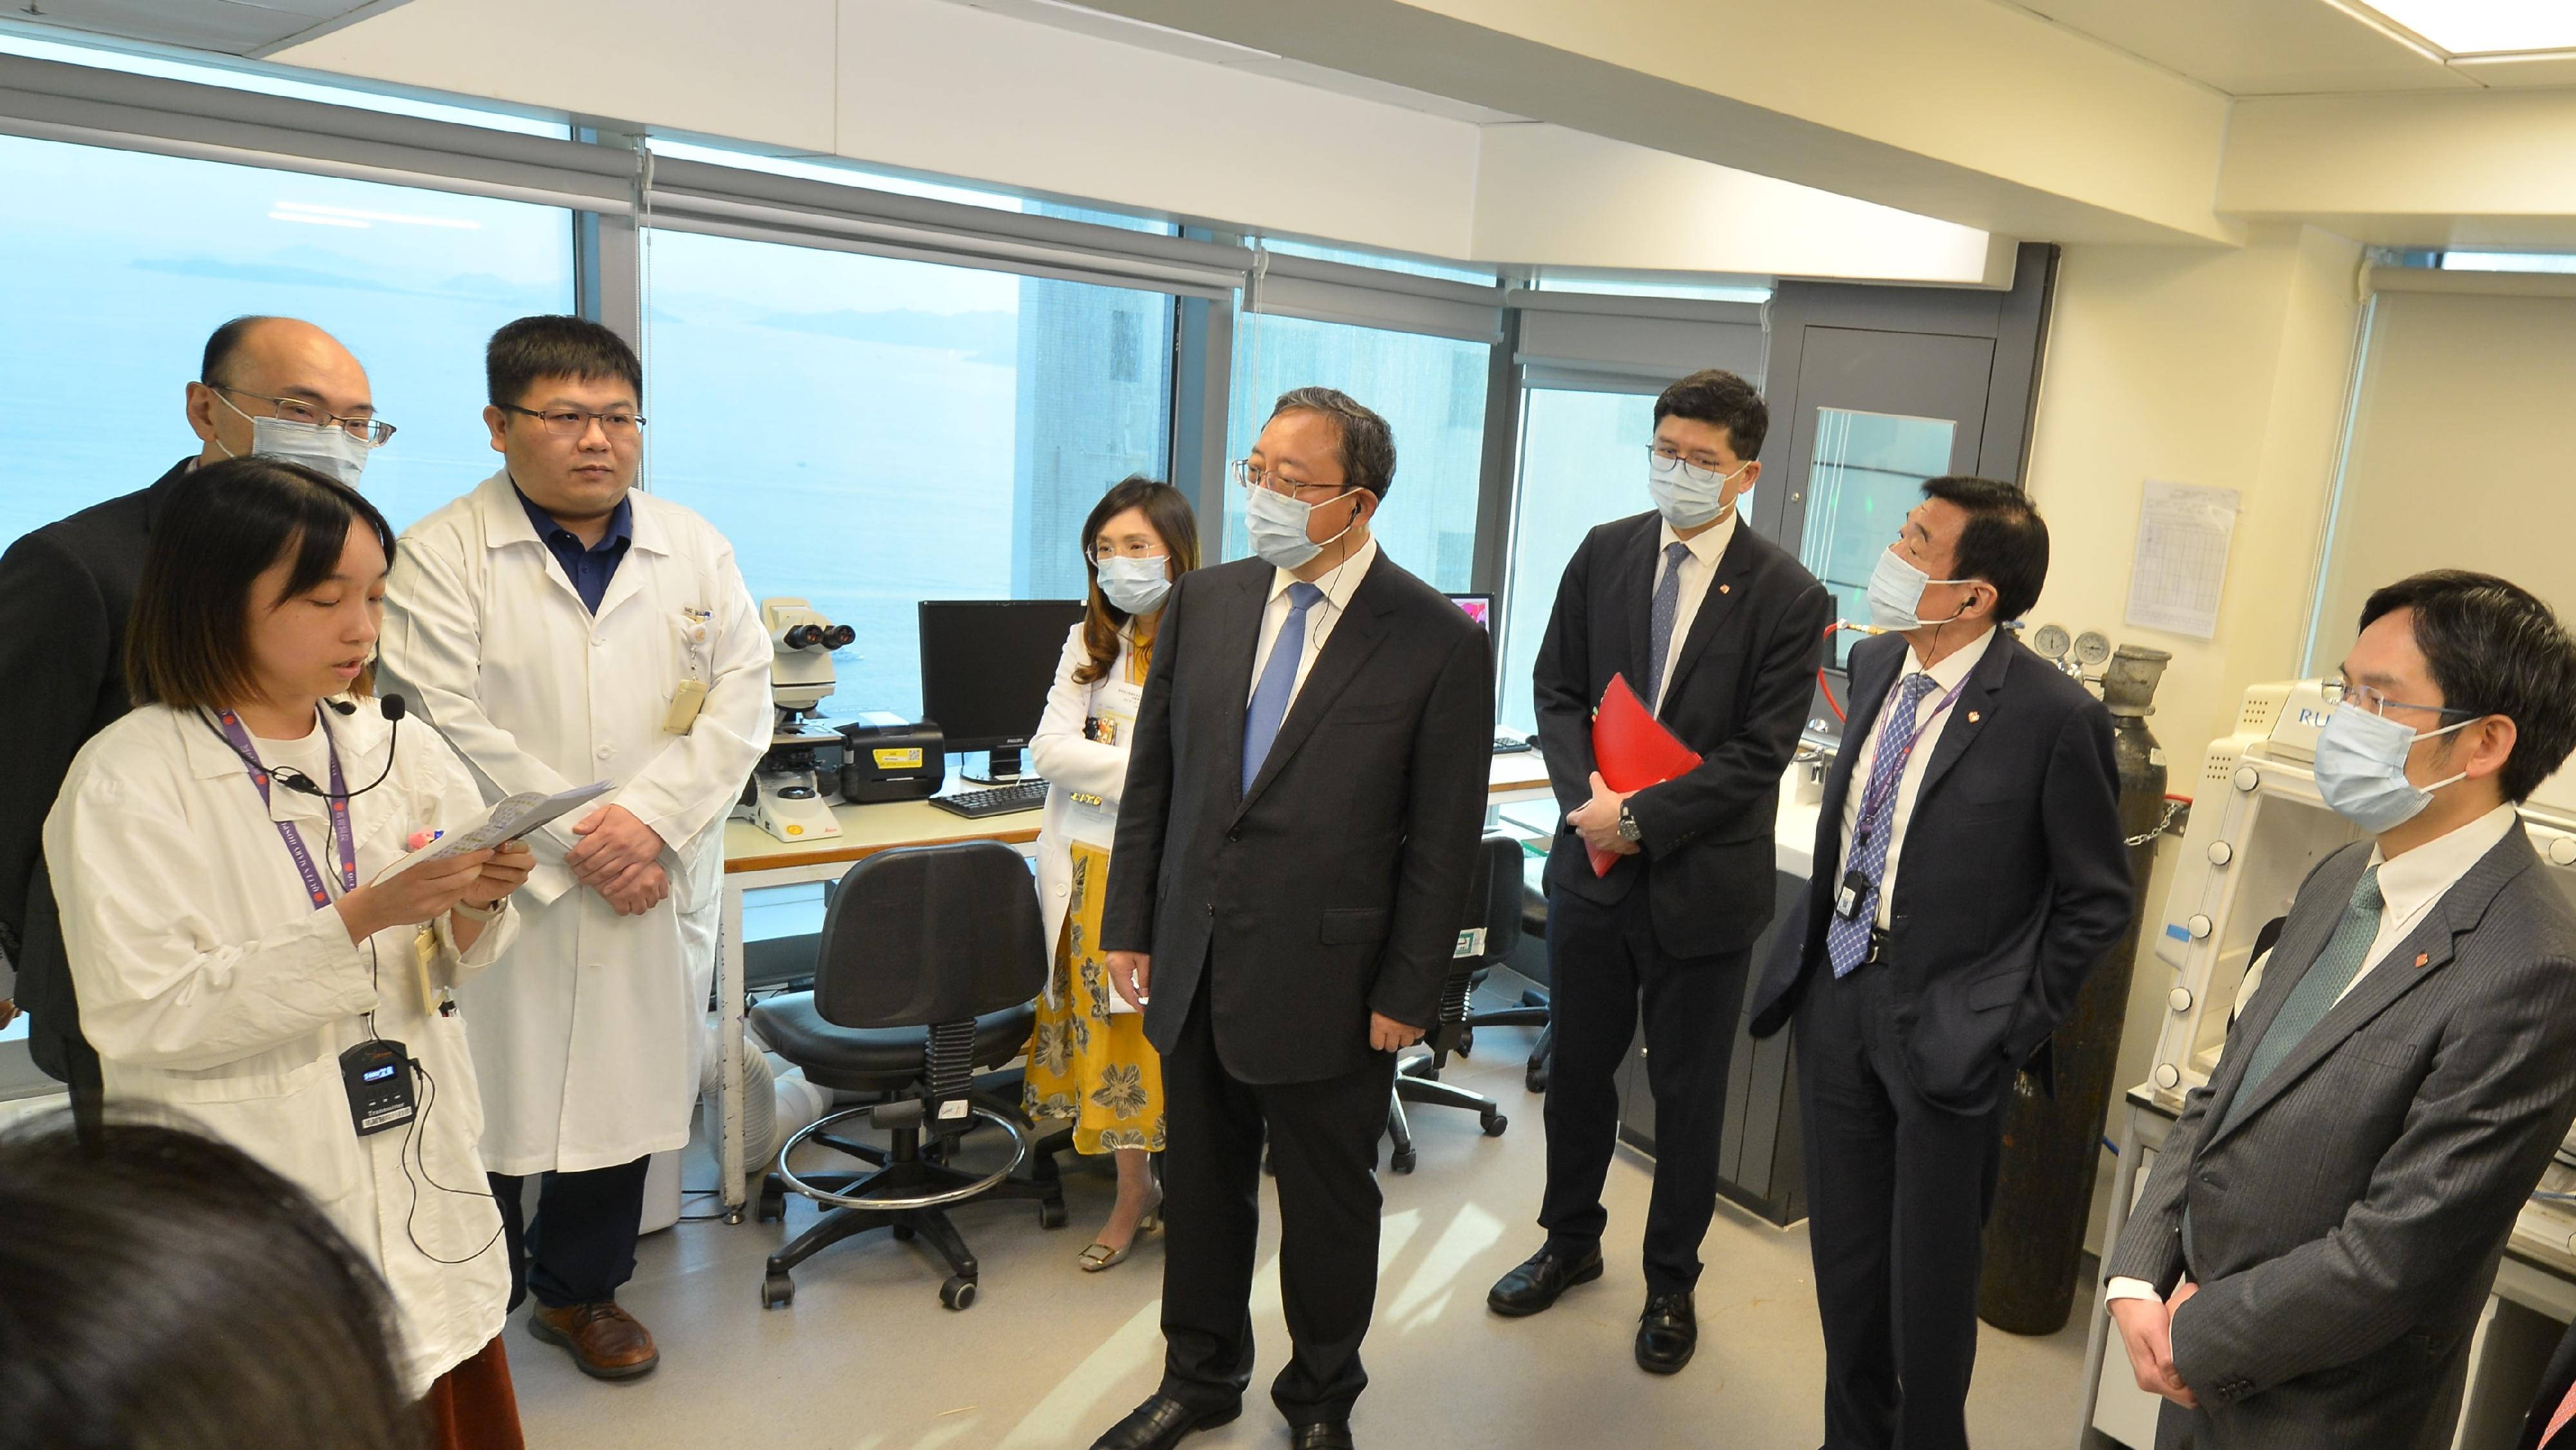 A delegation led by Vice-Minister of the National Health Commission of the People's Republic of China Mr Cao Xuetao visited Queen Mary Hospital earlier. Accompanied by the Hospital Authority Chairman, Mr Henry Fan (second right), and Chief Executive, Dr Tony Ko (third right), and the Chief Executive of the Hong Kong West Cluster, Dr Theresa Li (fourth left), Mr Cao (fourth right) learns about the services in public hospitals.